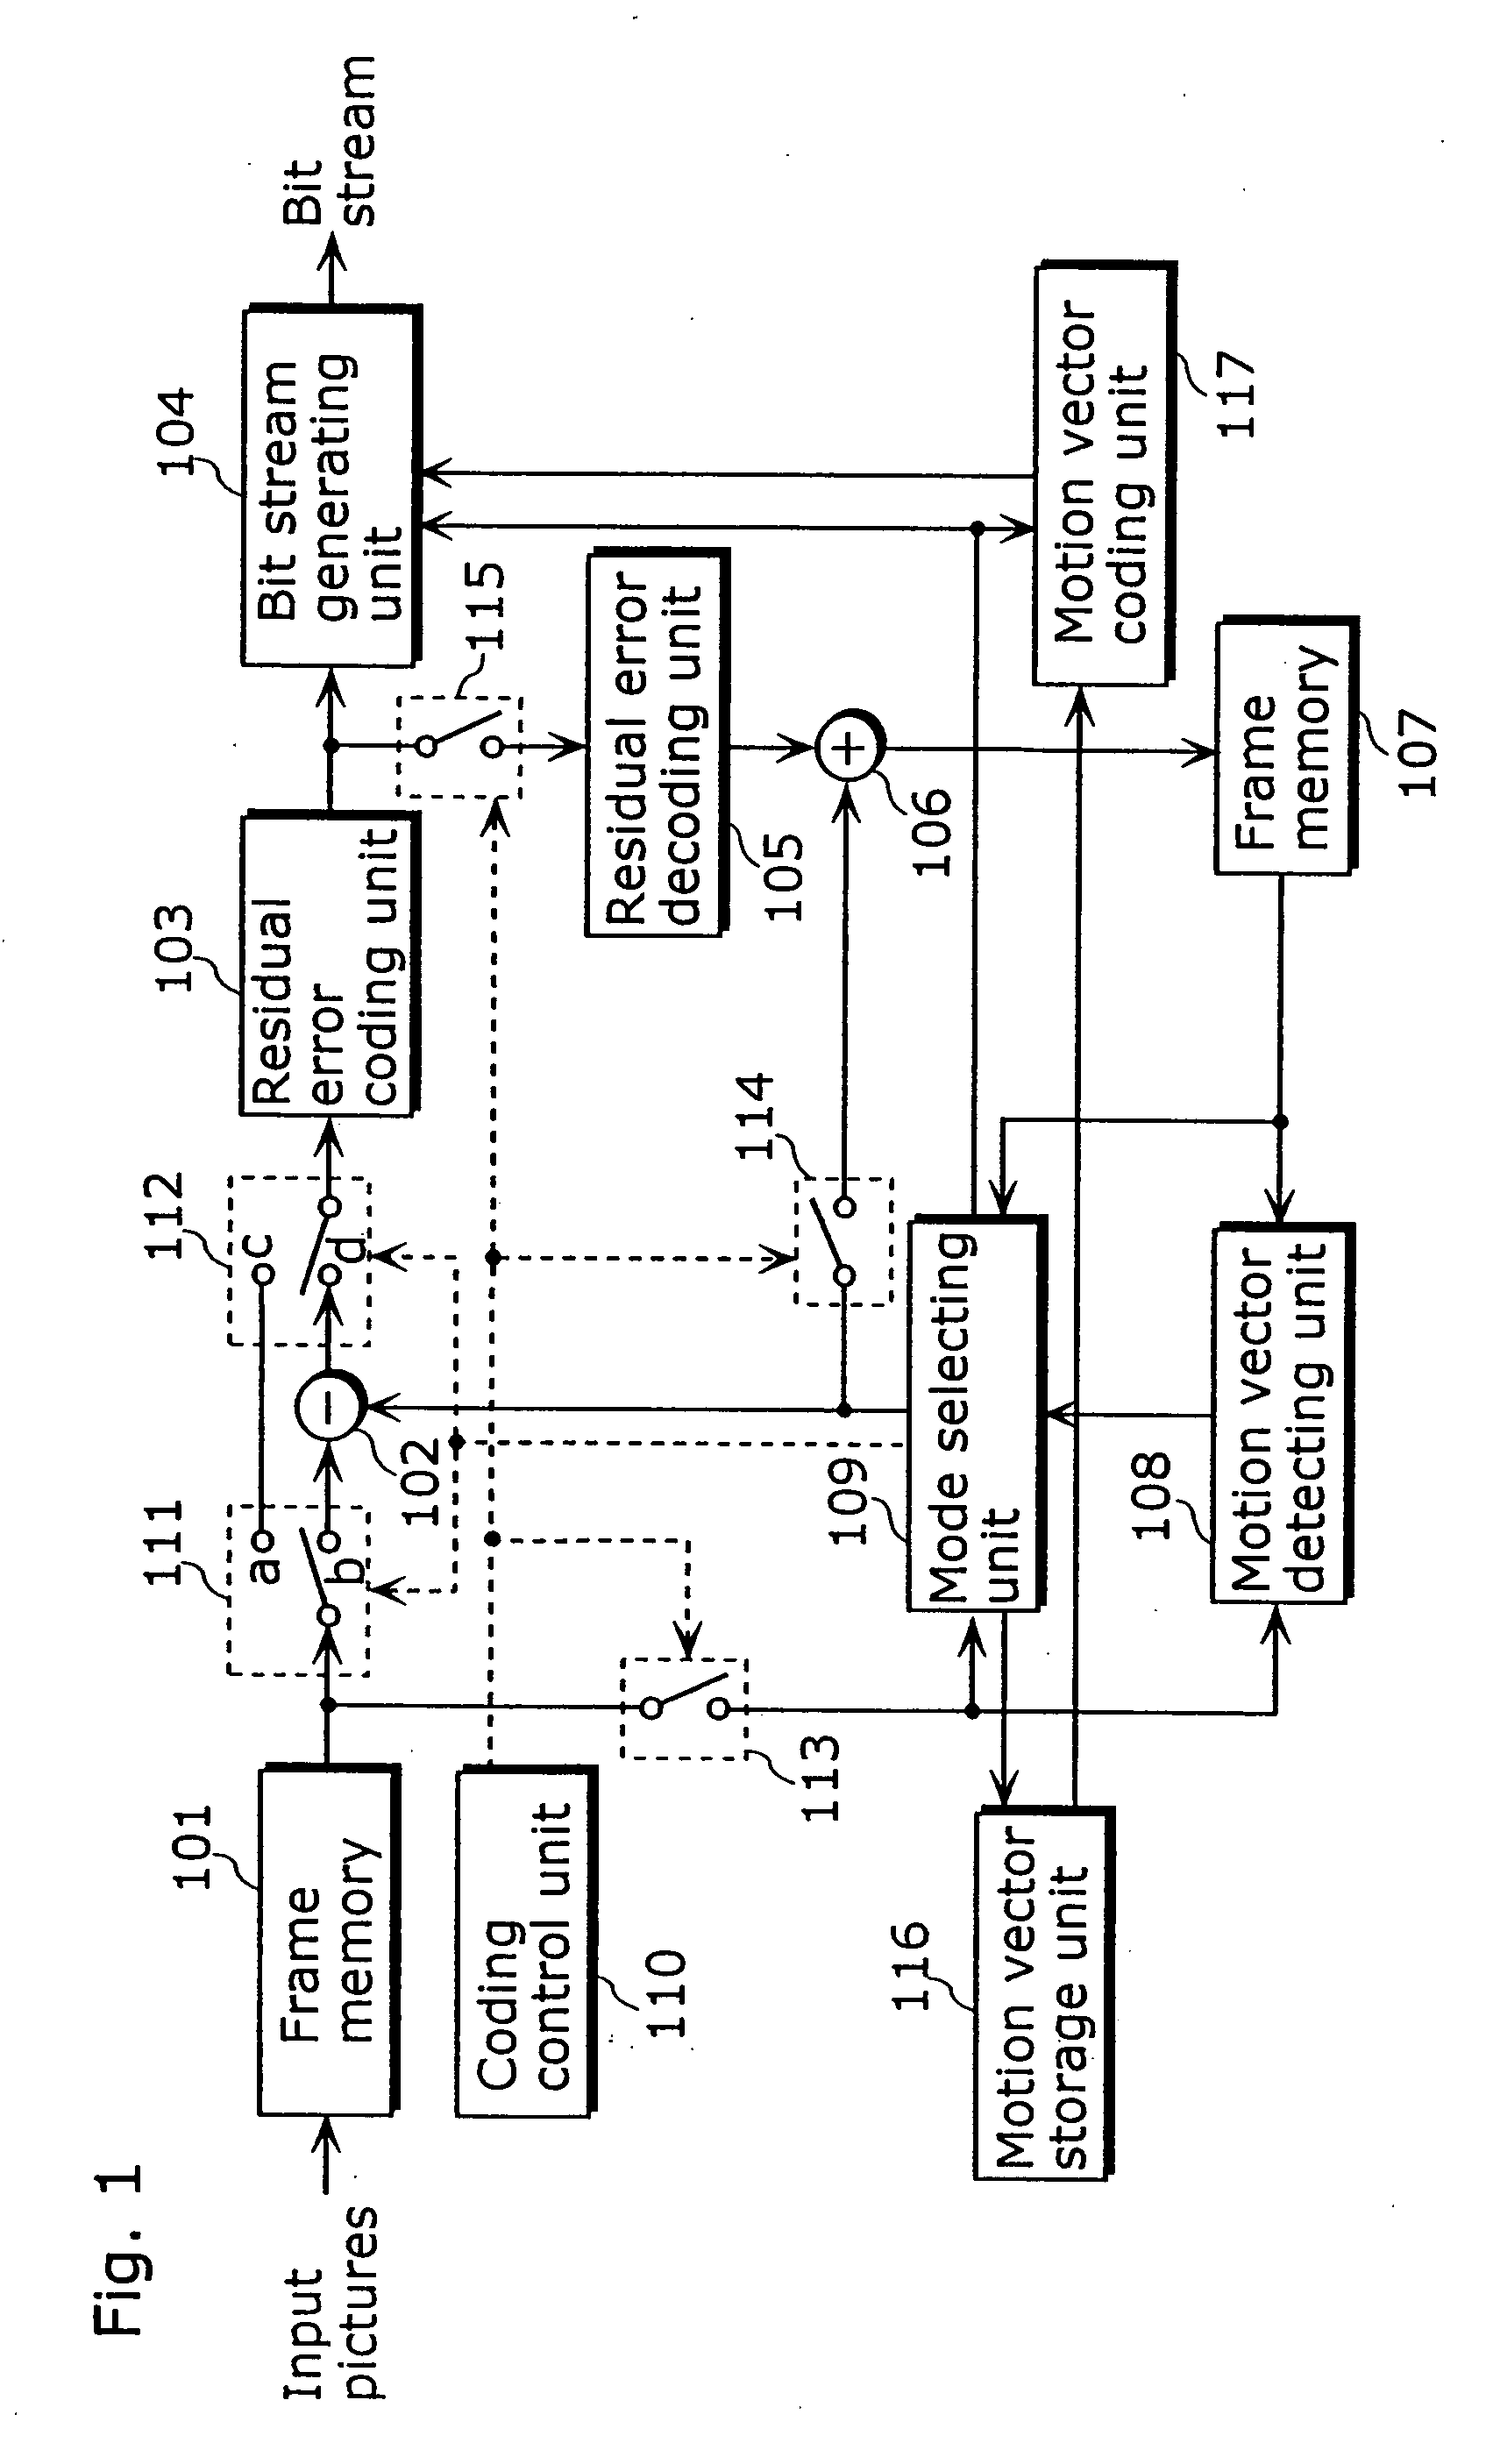 Motion vector coding and decoding methods